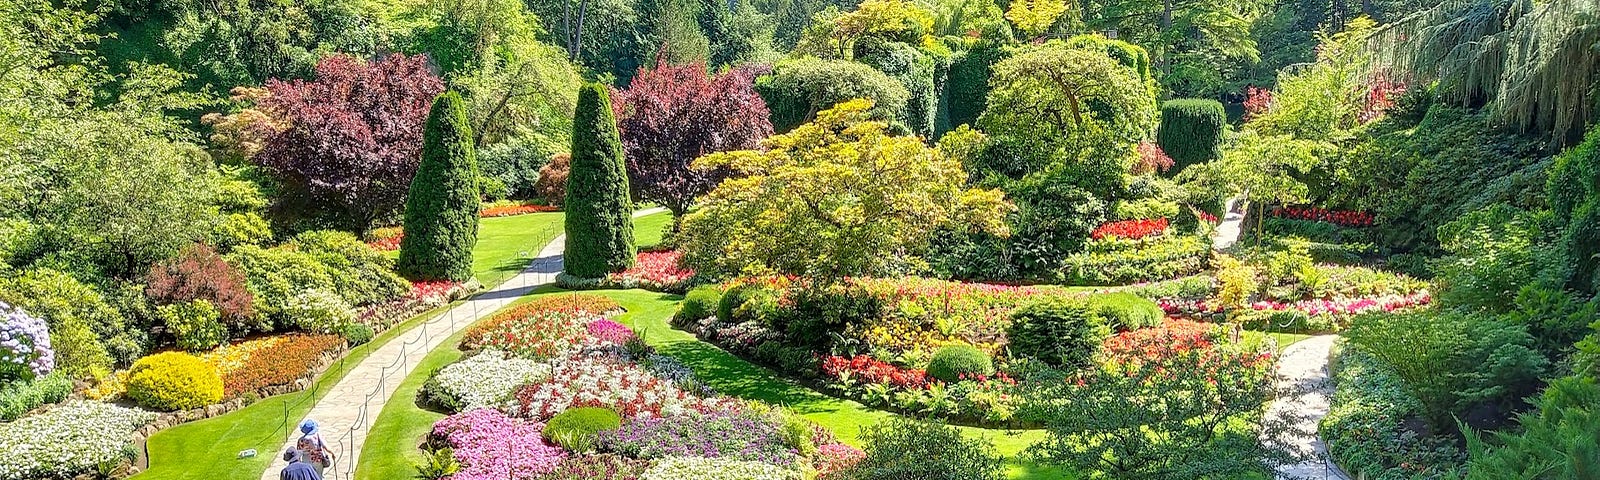 Overlooking the Sunken Garden with sprawling flowers, trees amzingly landscaped.